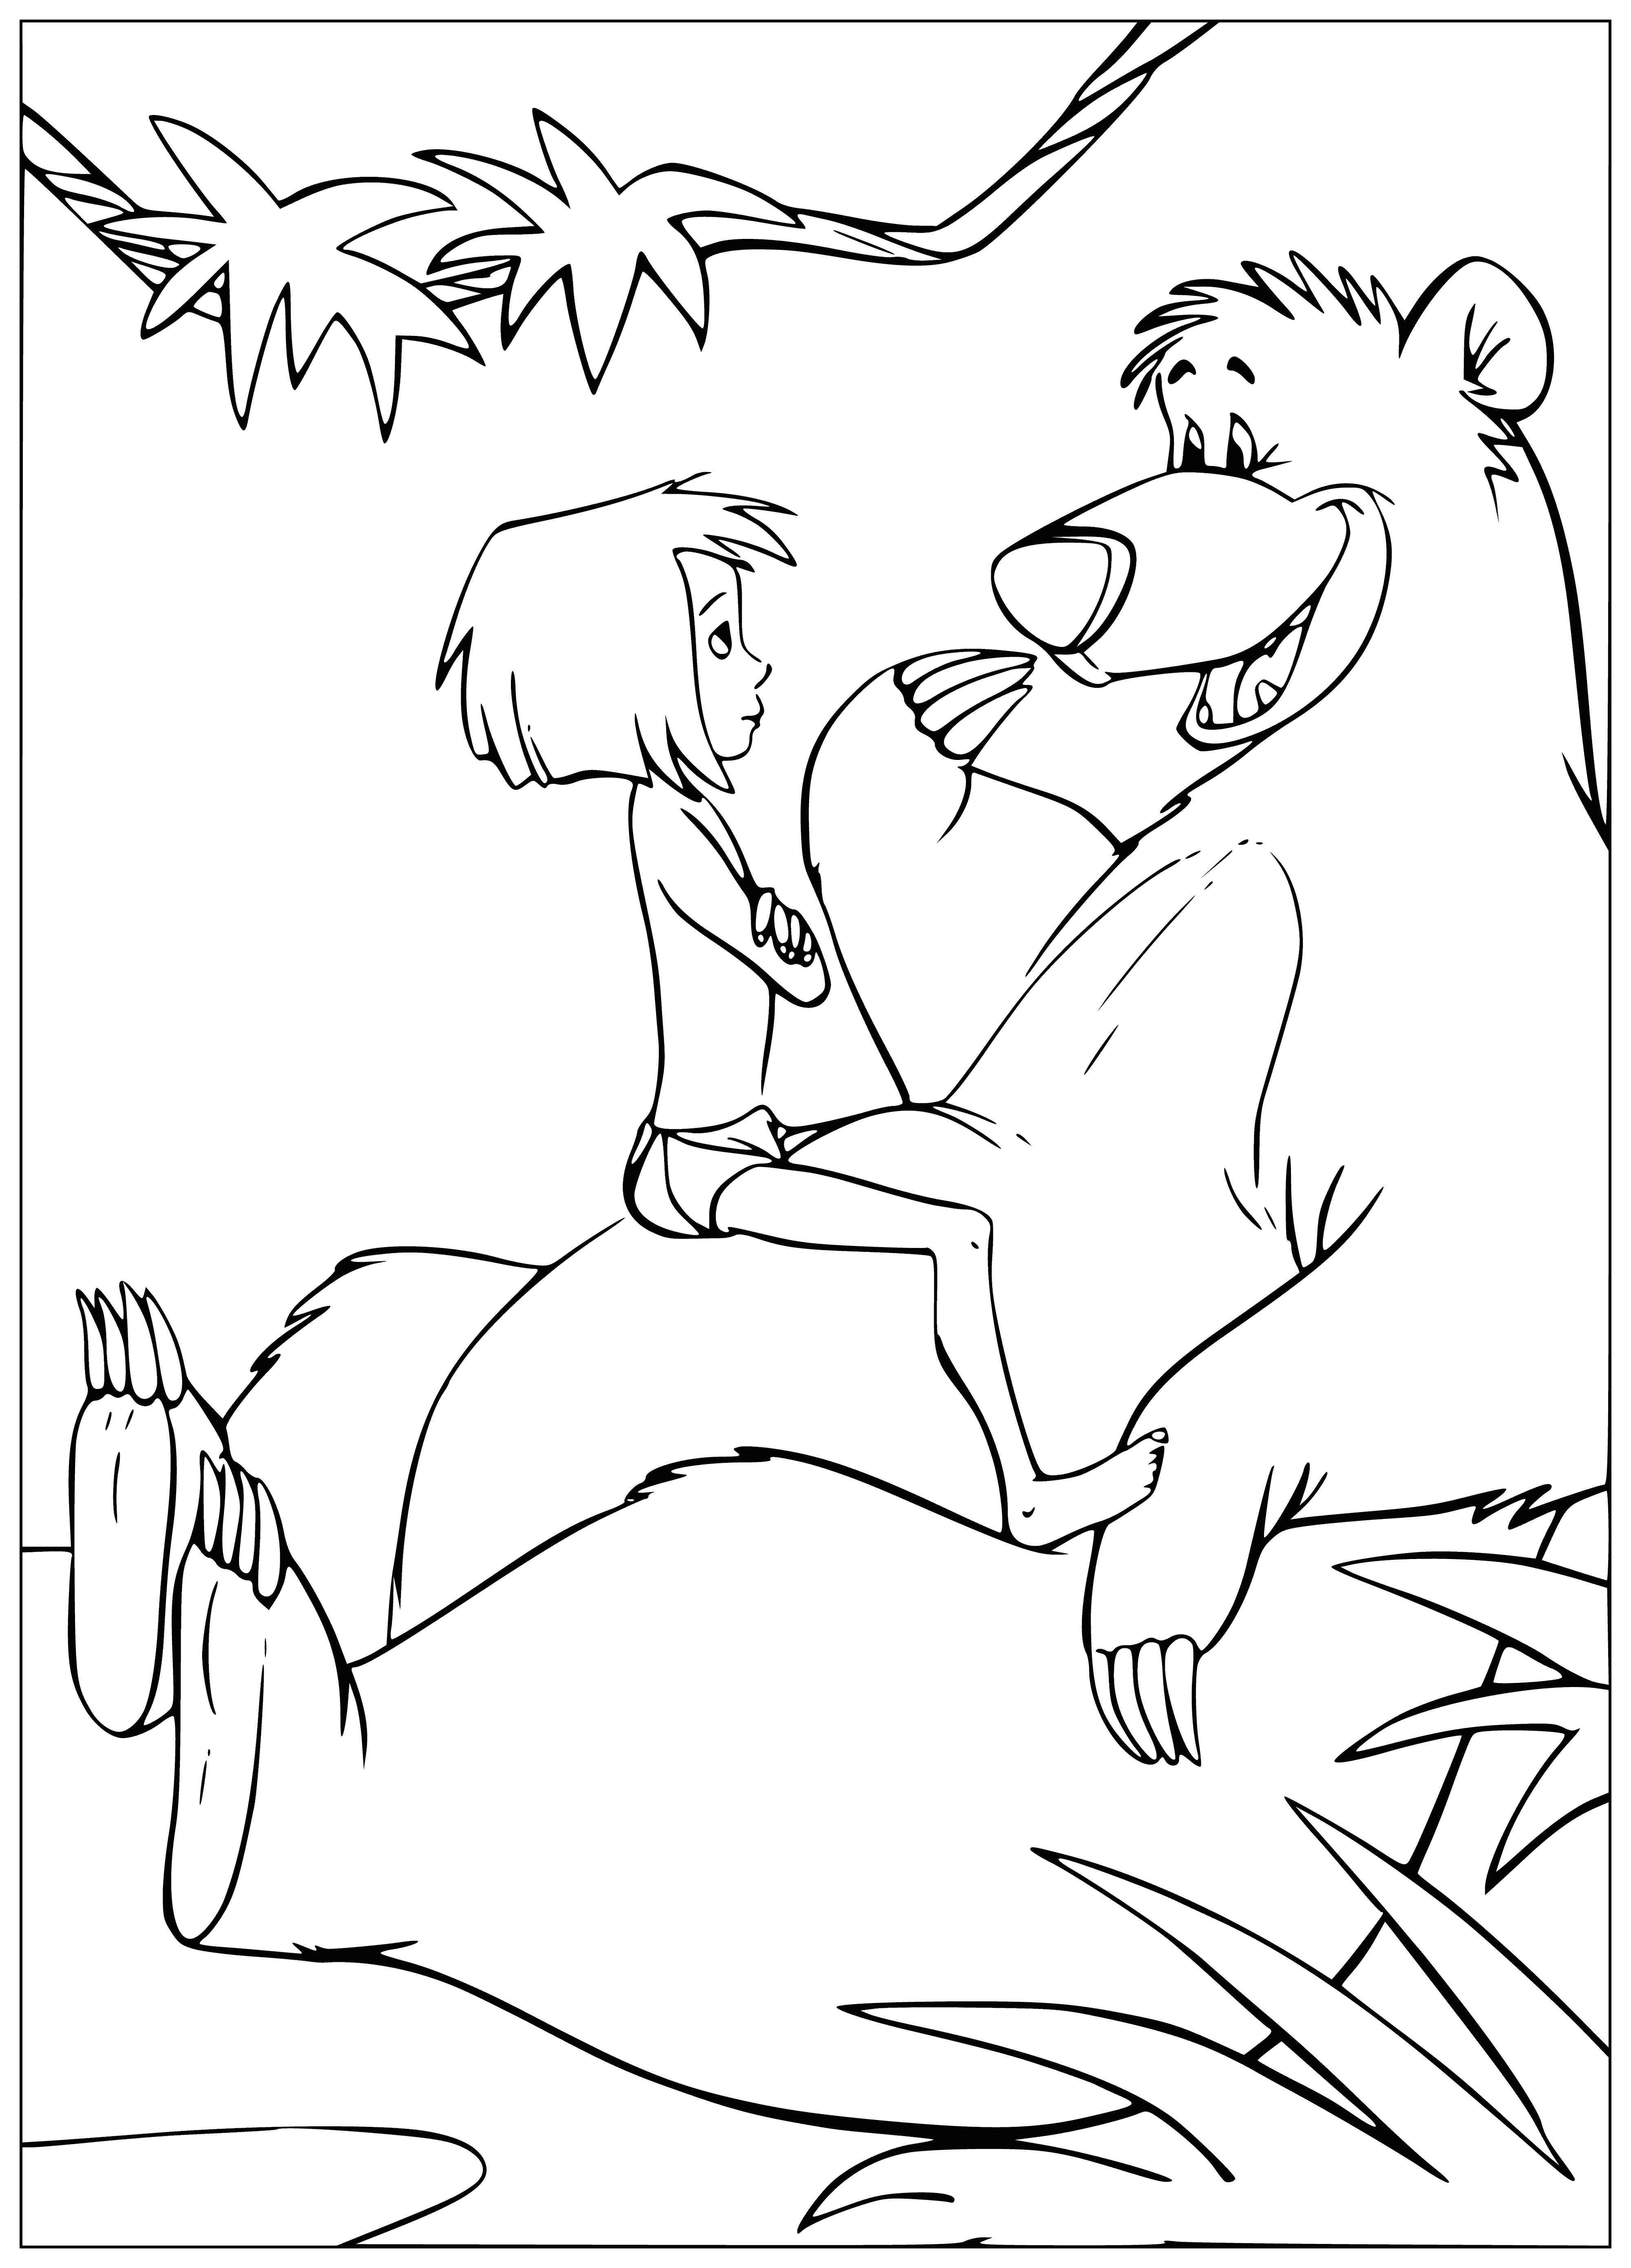 coloring page: Mowgli has fun playing with the friendly bear, Baloo.